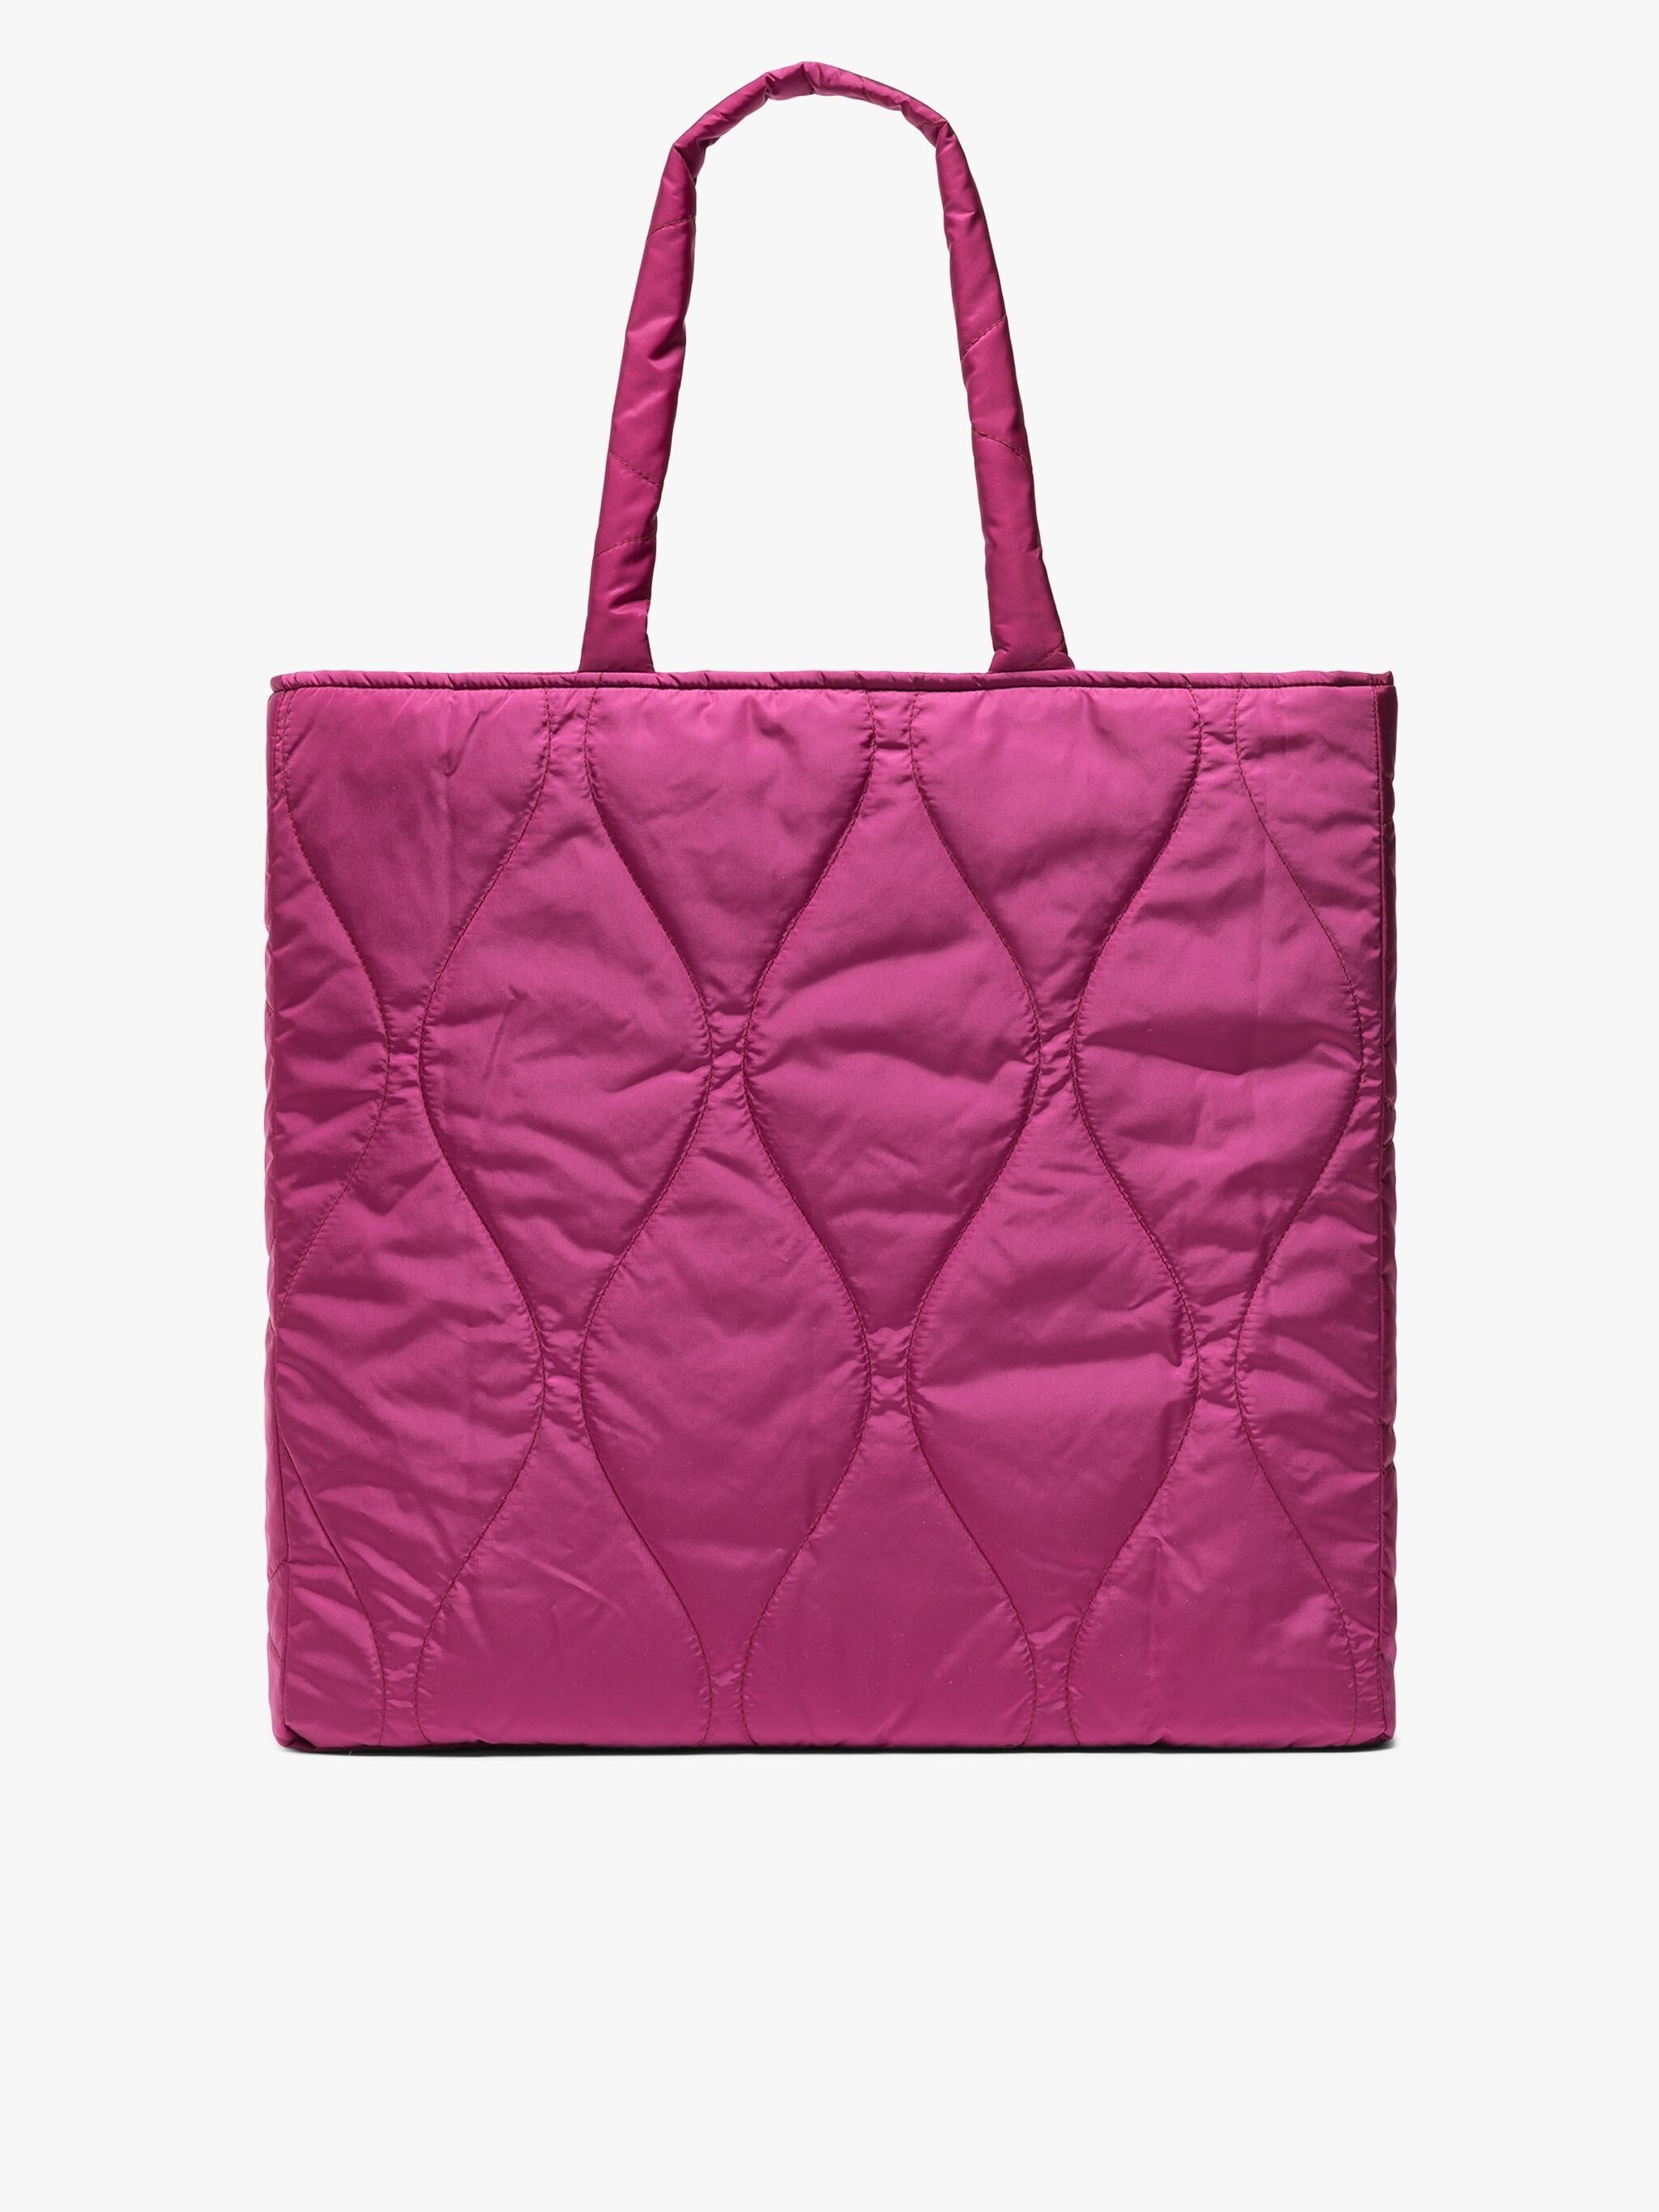 LEXIS BURGUNDY QUILTED NYLON BAG - 2